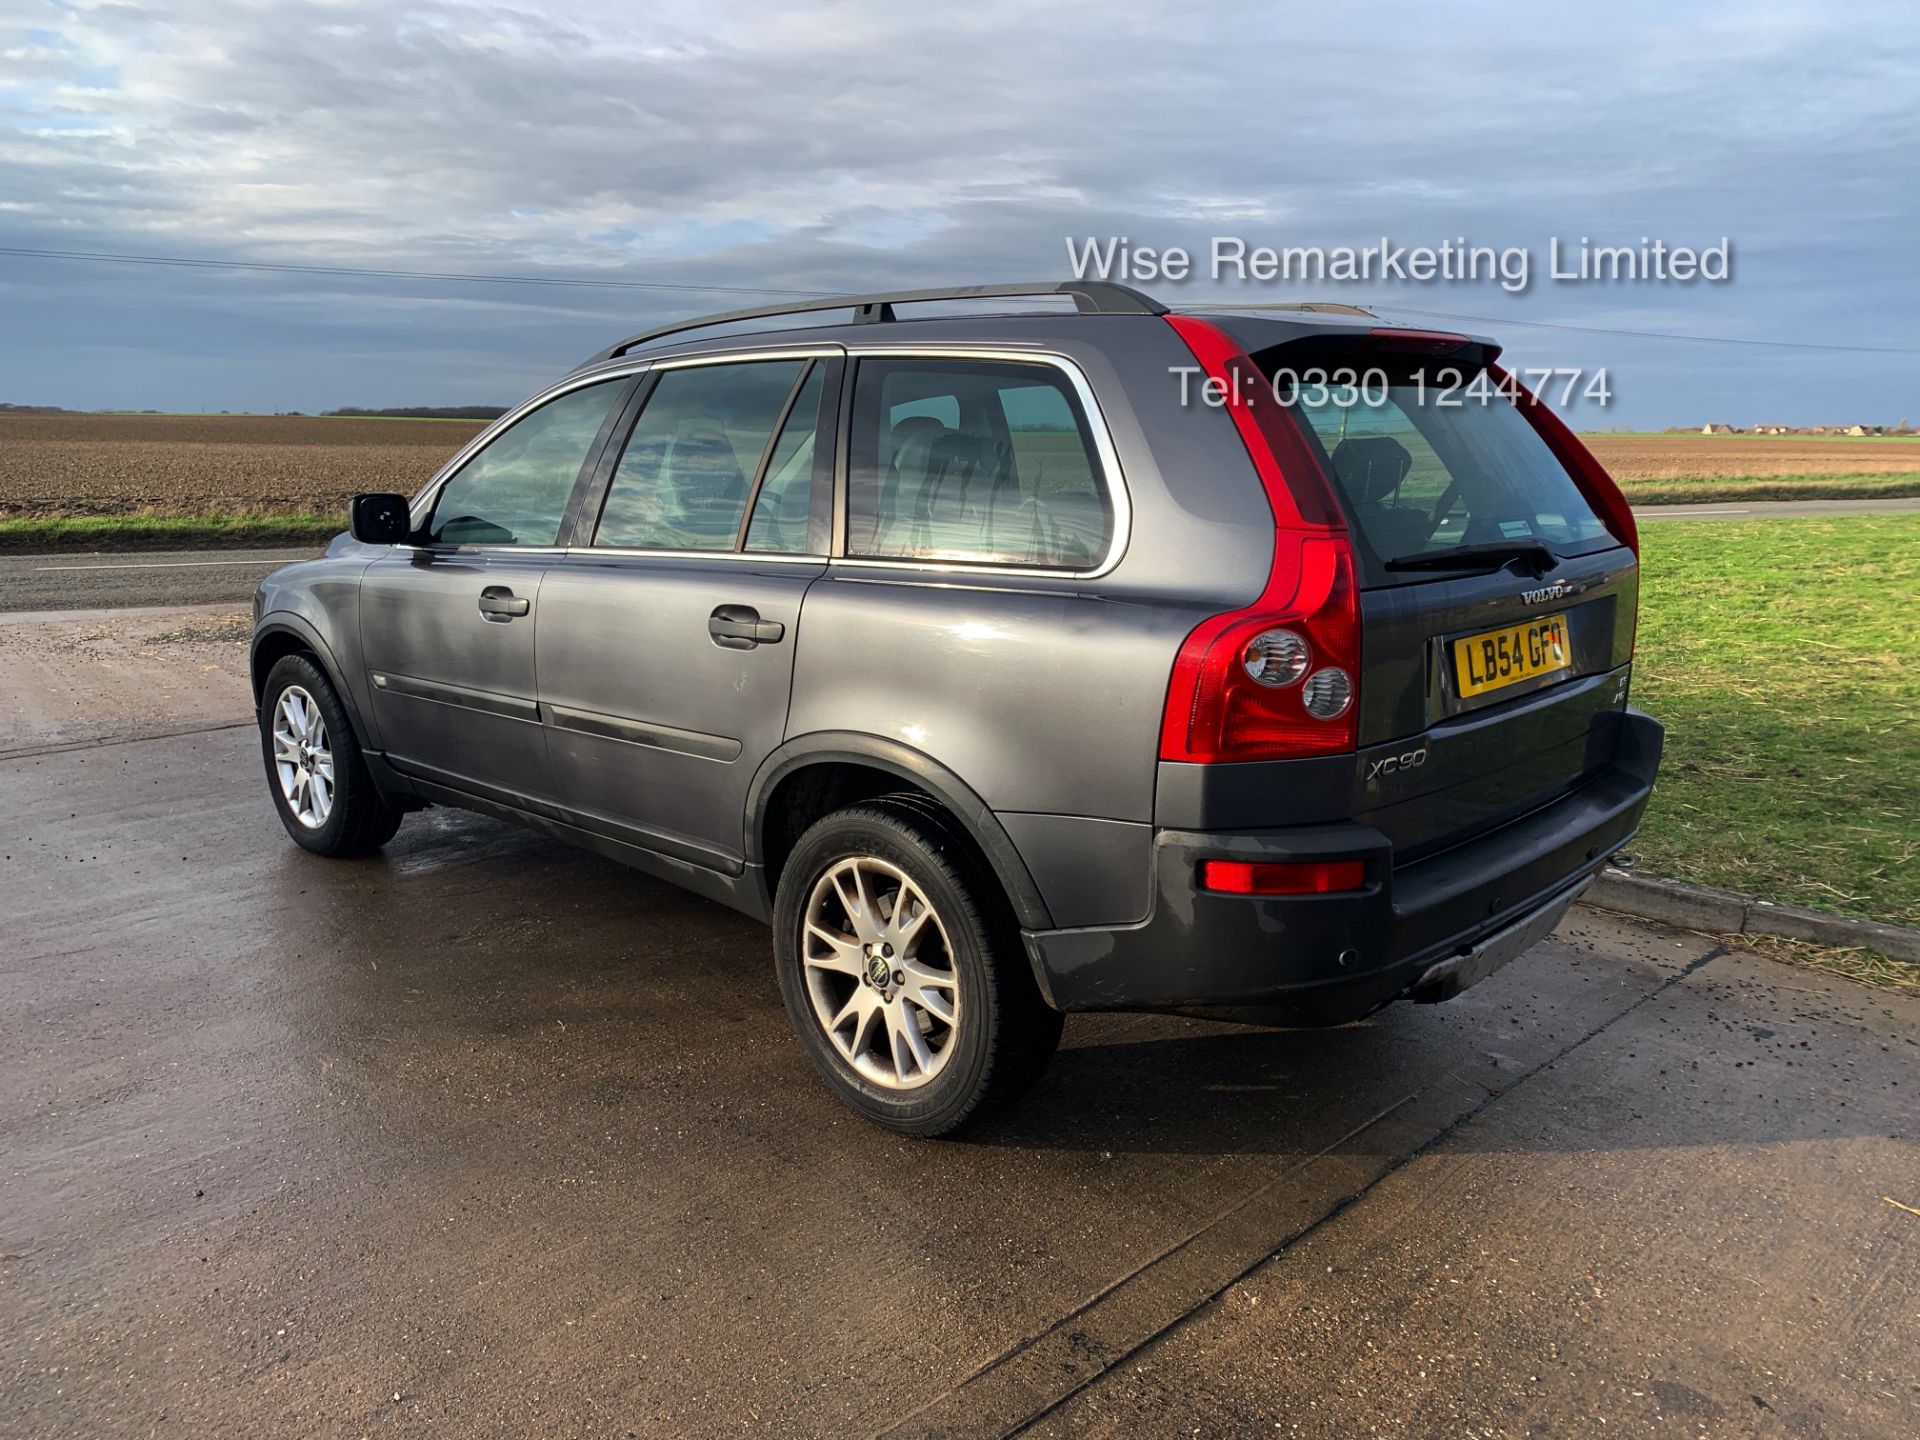 (RESERVE MET) Volvo XC90 D5 2.4 Special Equipment Auto - 2005 Model - 7 Seater - Full Leather - - Image 6 of 21